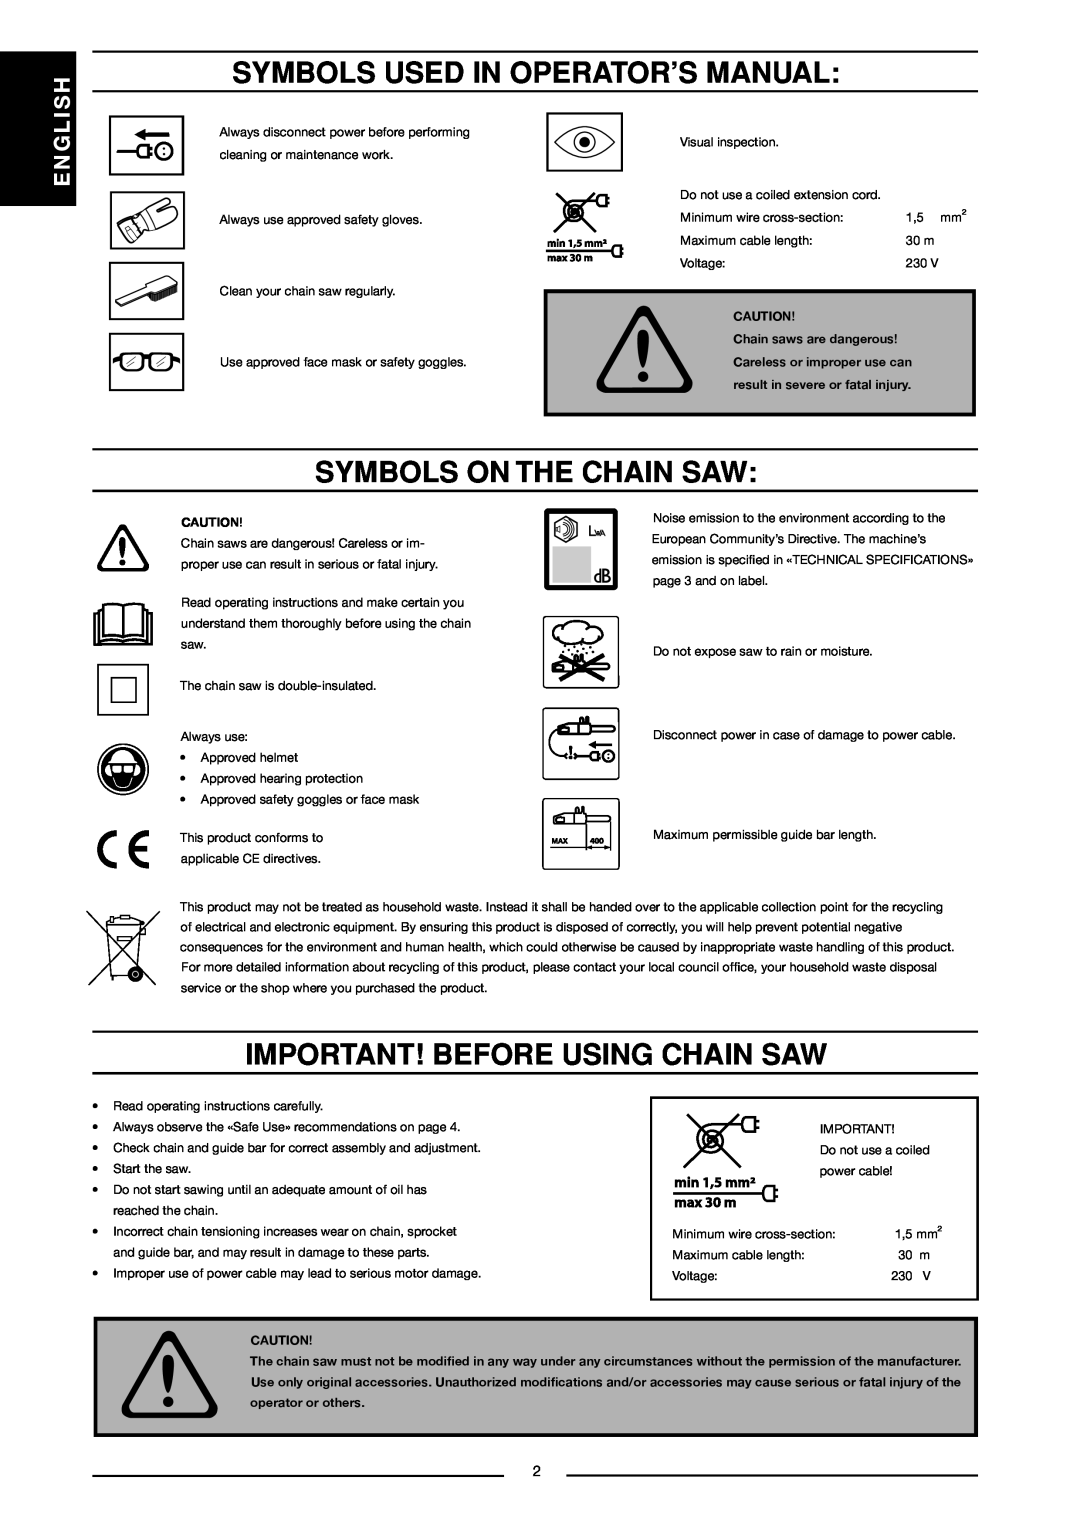 Husqvarna 317 EL, 321 EL Symbols Used In Operator’S Manual, Symbols On The Chain Saw, Important! Before Using Chain Saw 